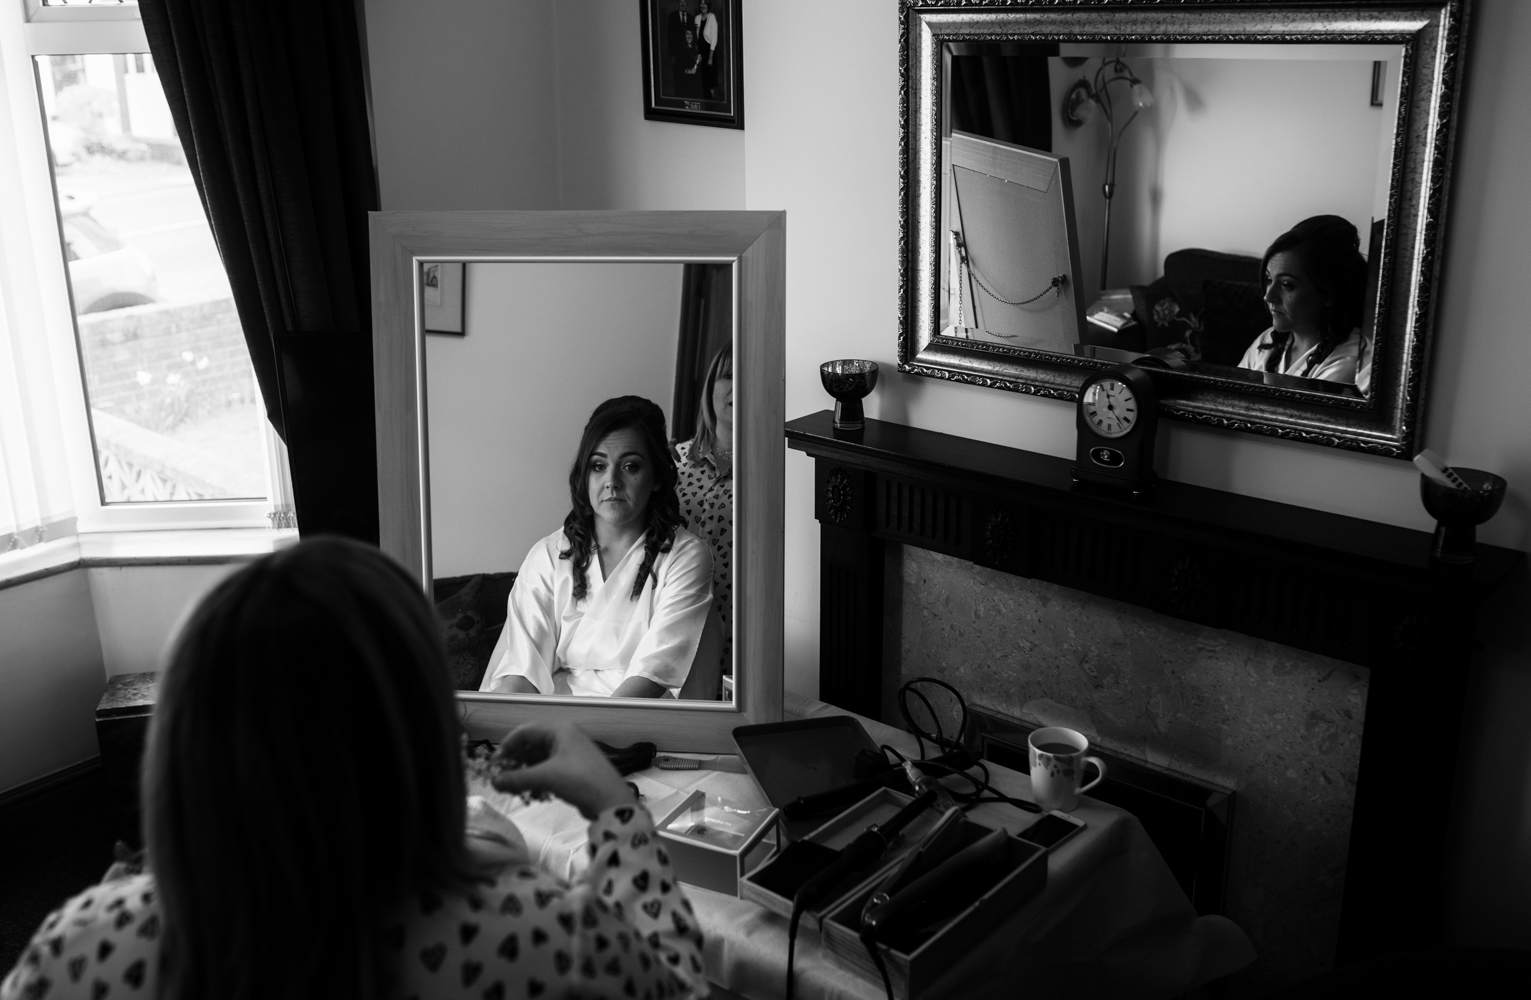 A Black and White image of the brides reflection in a mirror